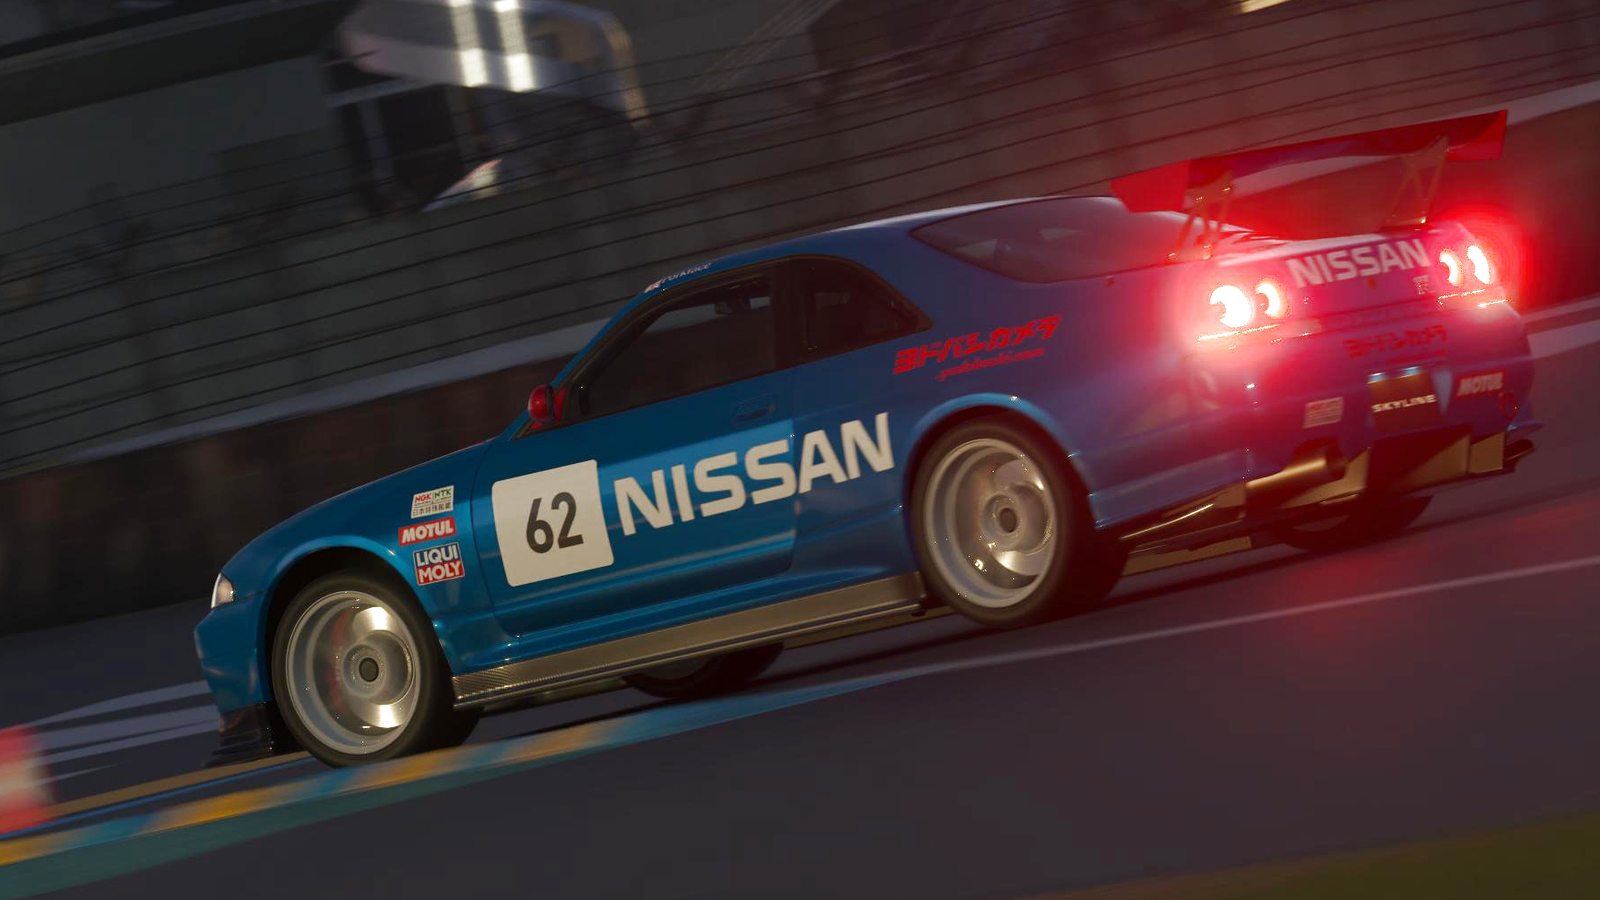 Gran Turismo 7 preview: A return to expansive, grindy, car